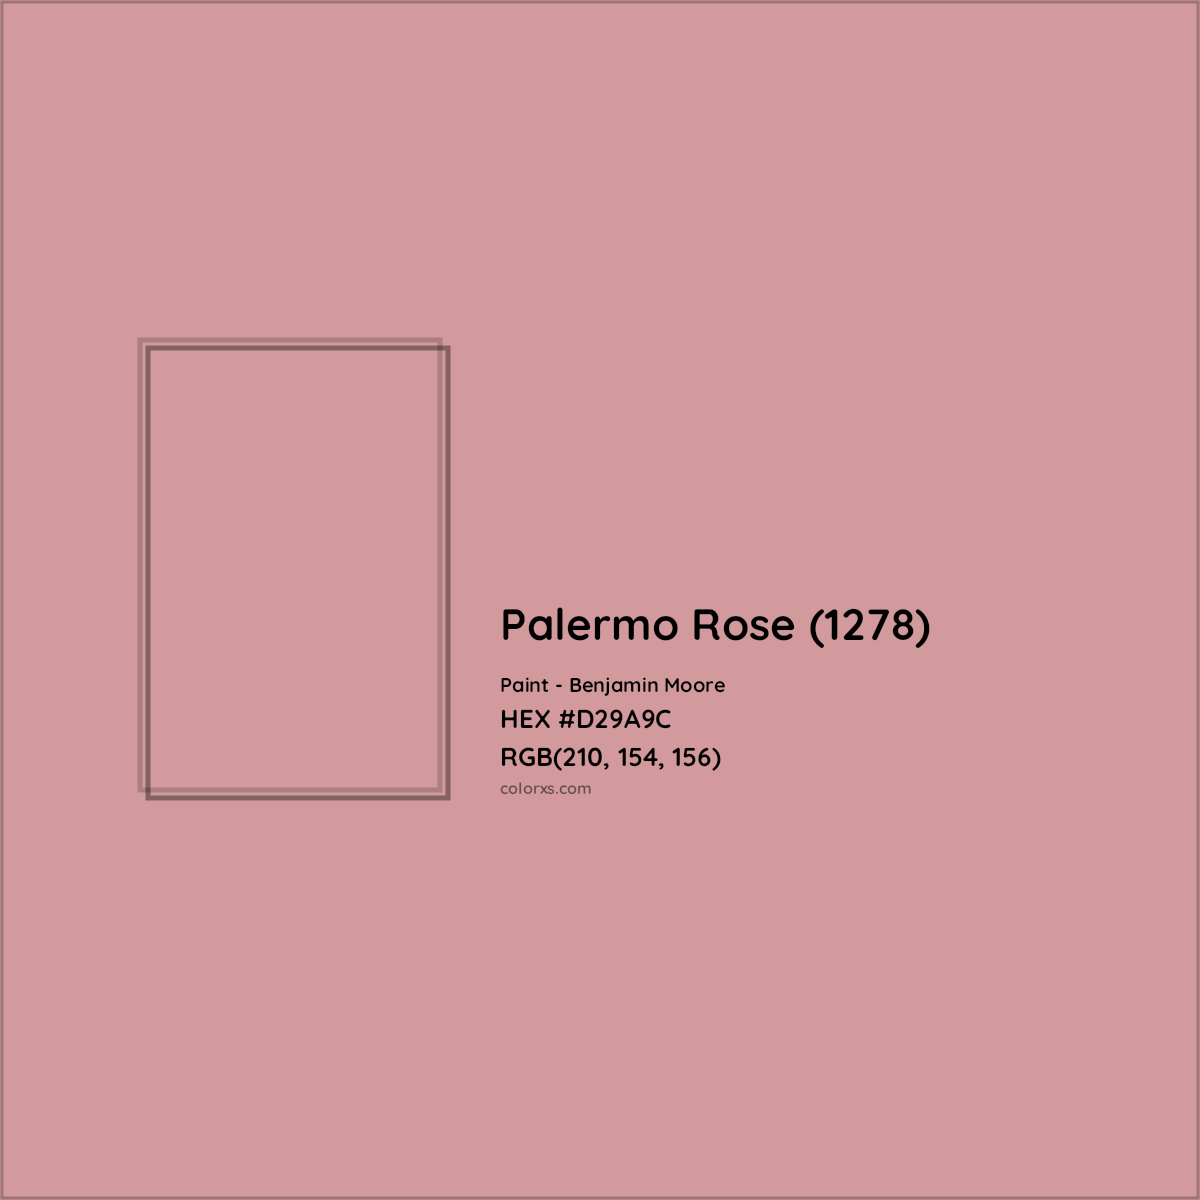 HEX #D29A9C Palermo Rose (1278) Paint Benjamin Moore - Color Code